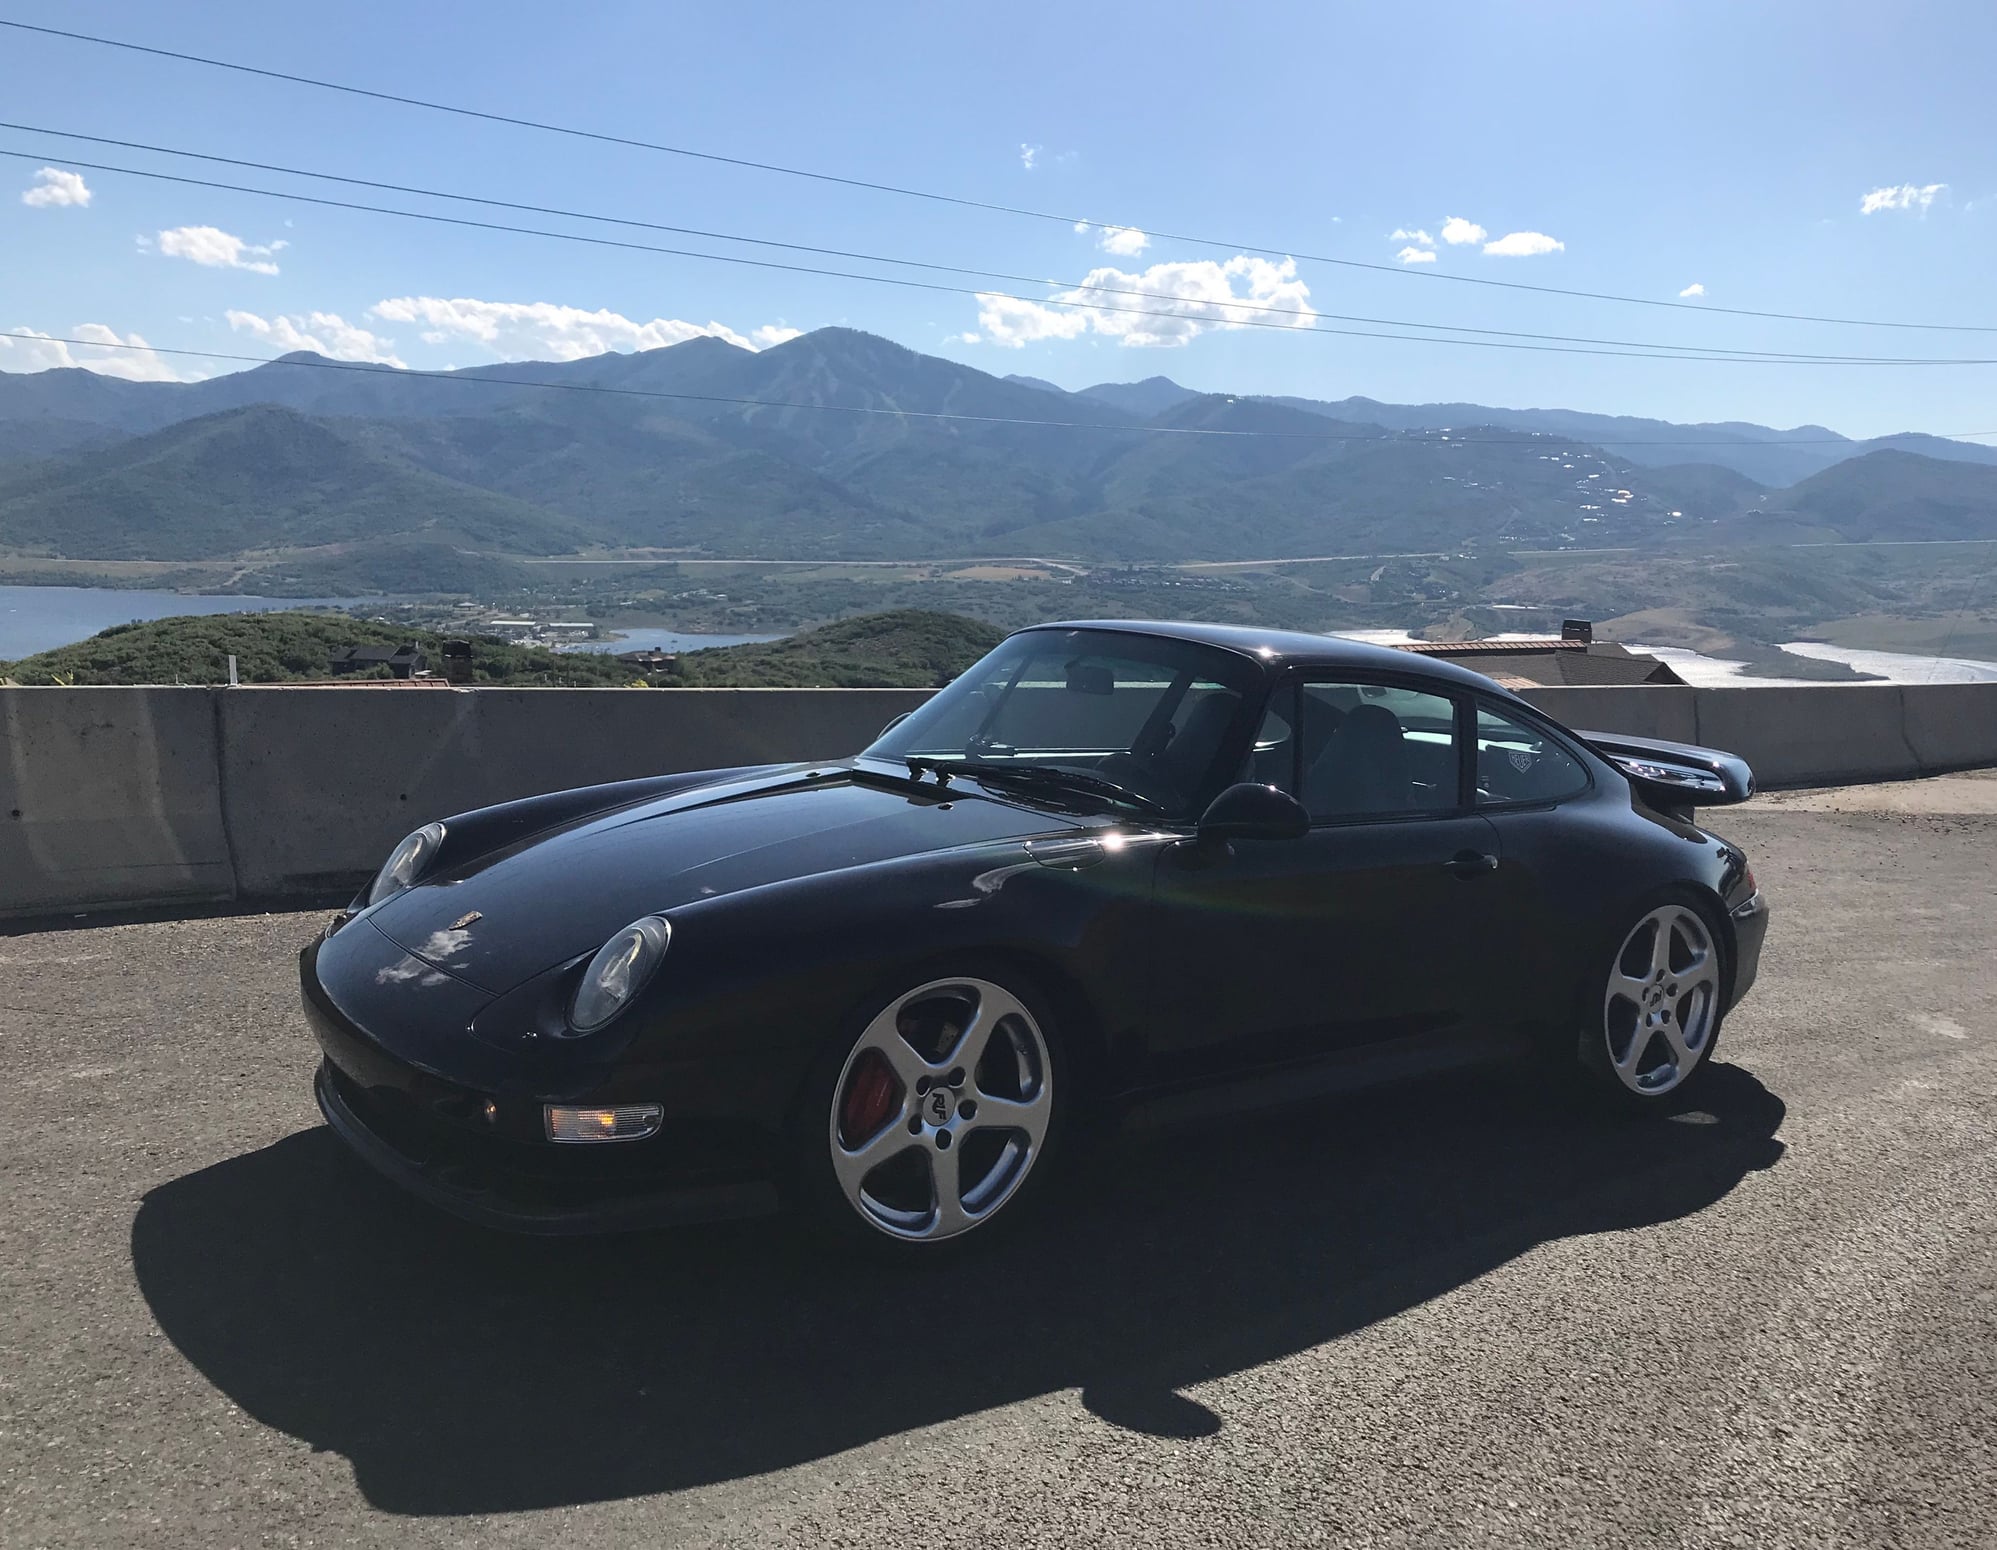 Wheels and Tires/Axles - RUF 19" Wheels 19x8.5/11 - Used - 1995 to 2012 Porsche 911 - Park City, UT 84098, United States